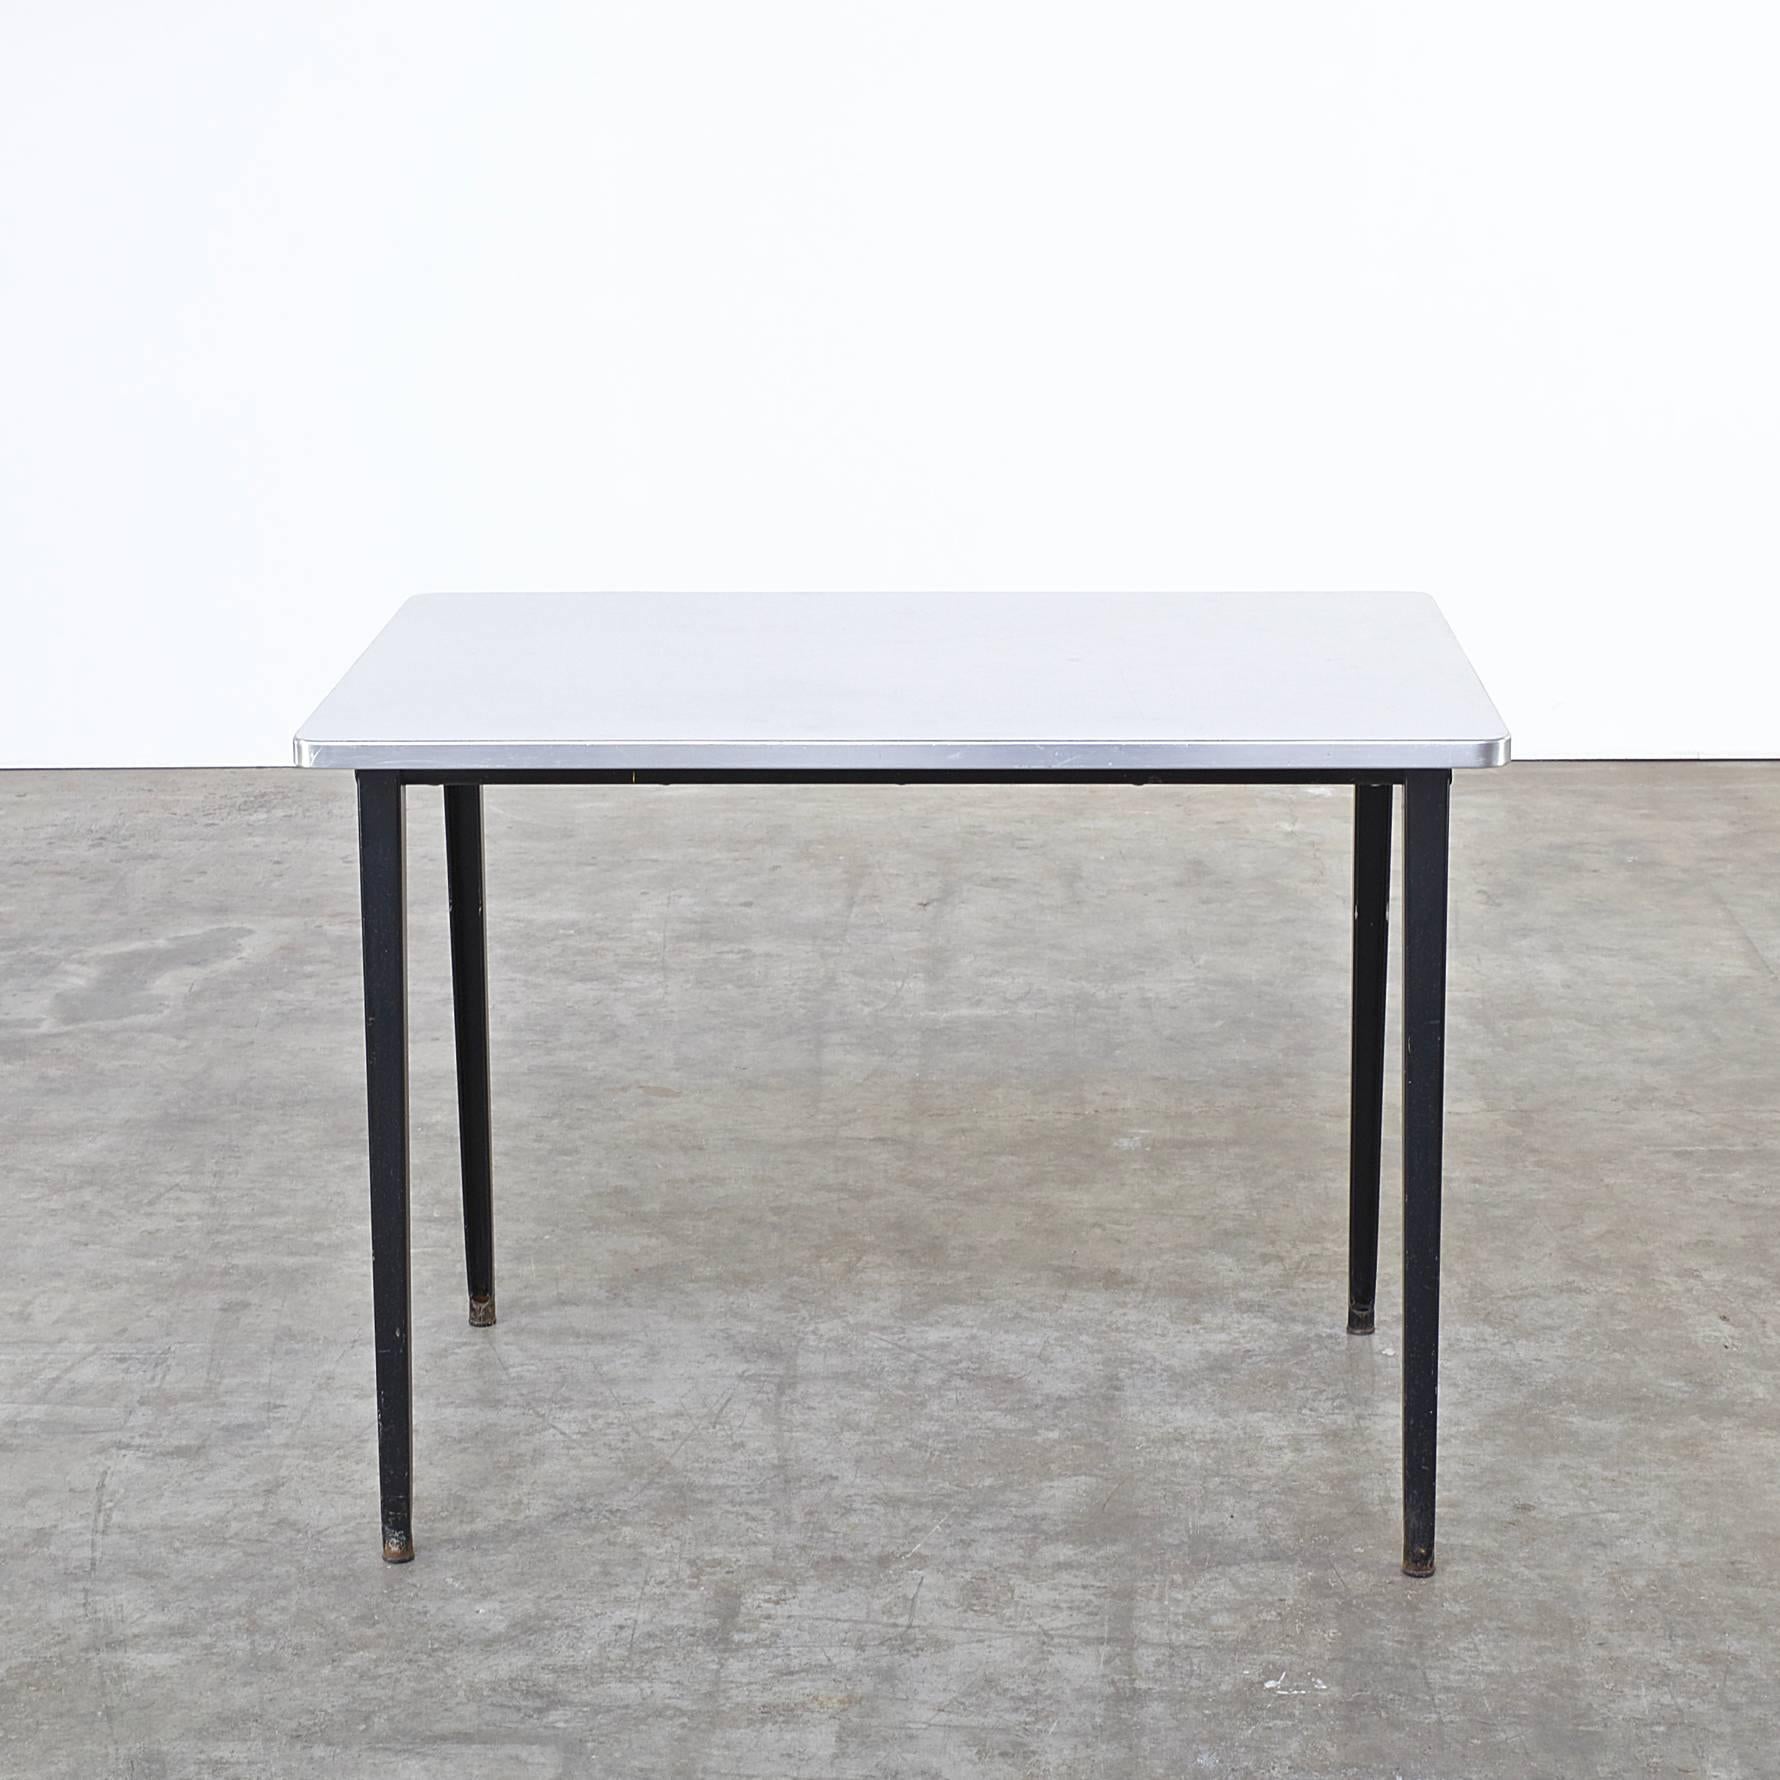 1960s Friso Kramer ‘Reform’ table for Gispen. Firm, fair condition. Wear consistent with age and use. Steel frame, formica worktop. Dimensions: 100cm (W) x 69cm (D) x 75cm (H).